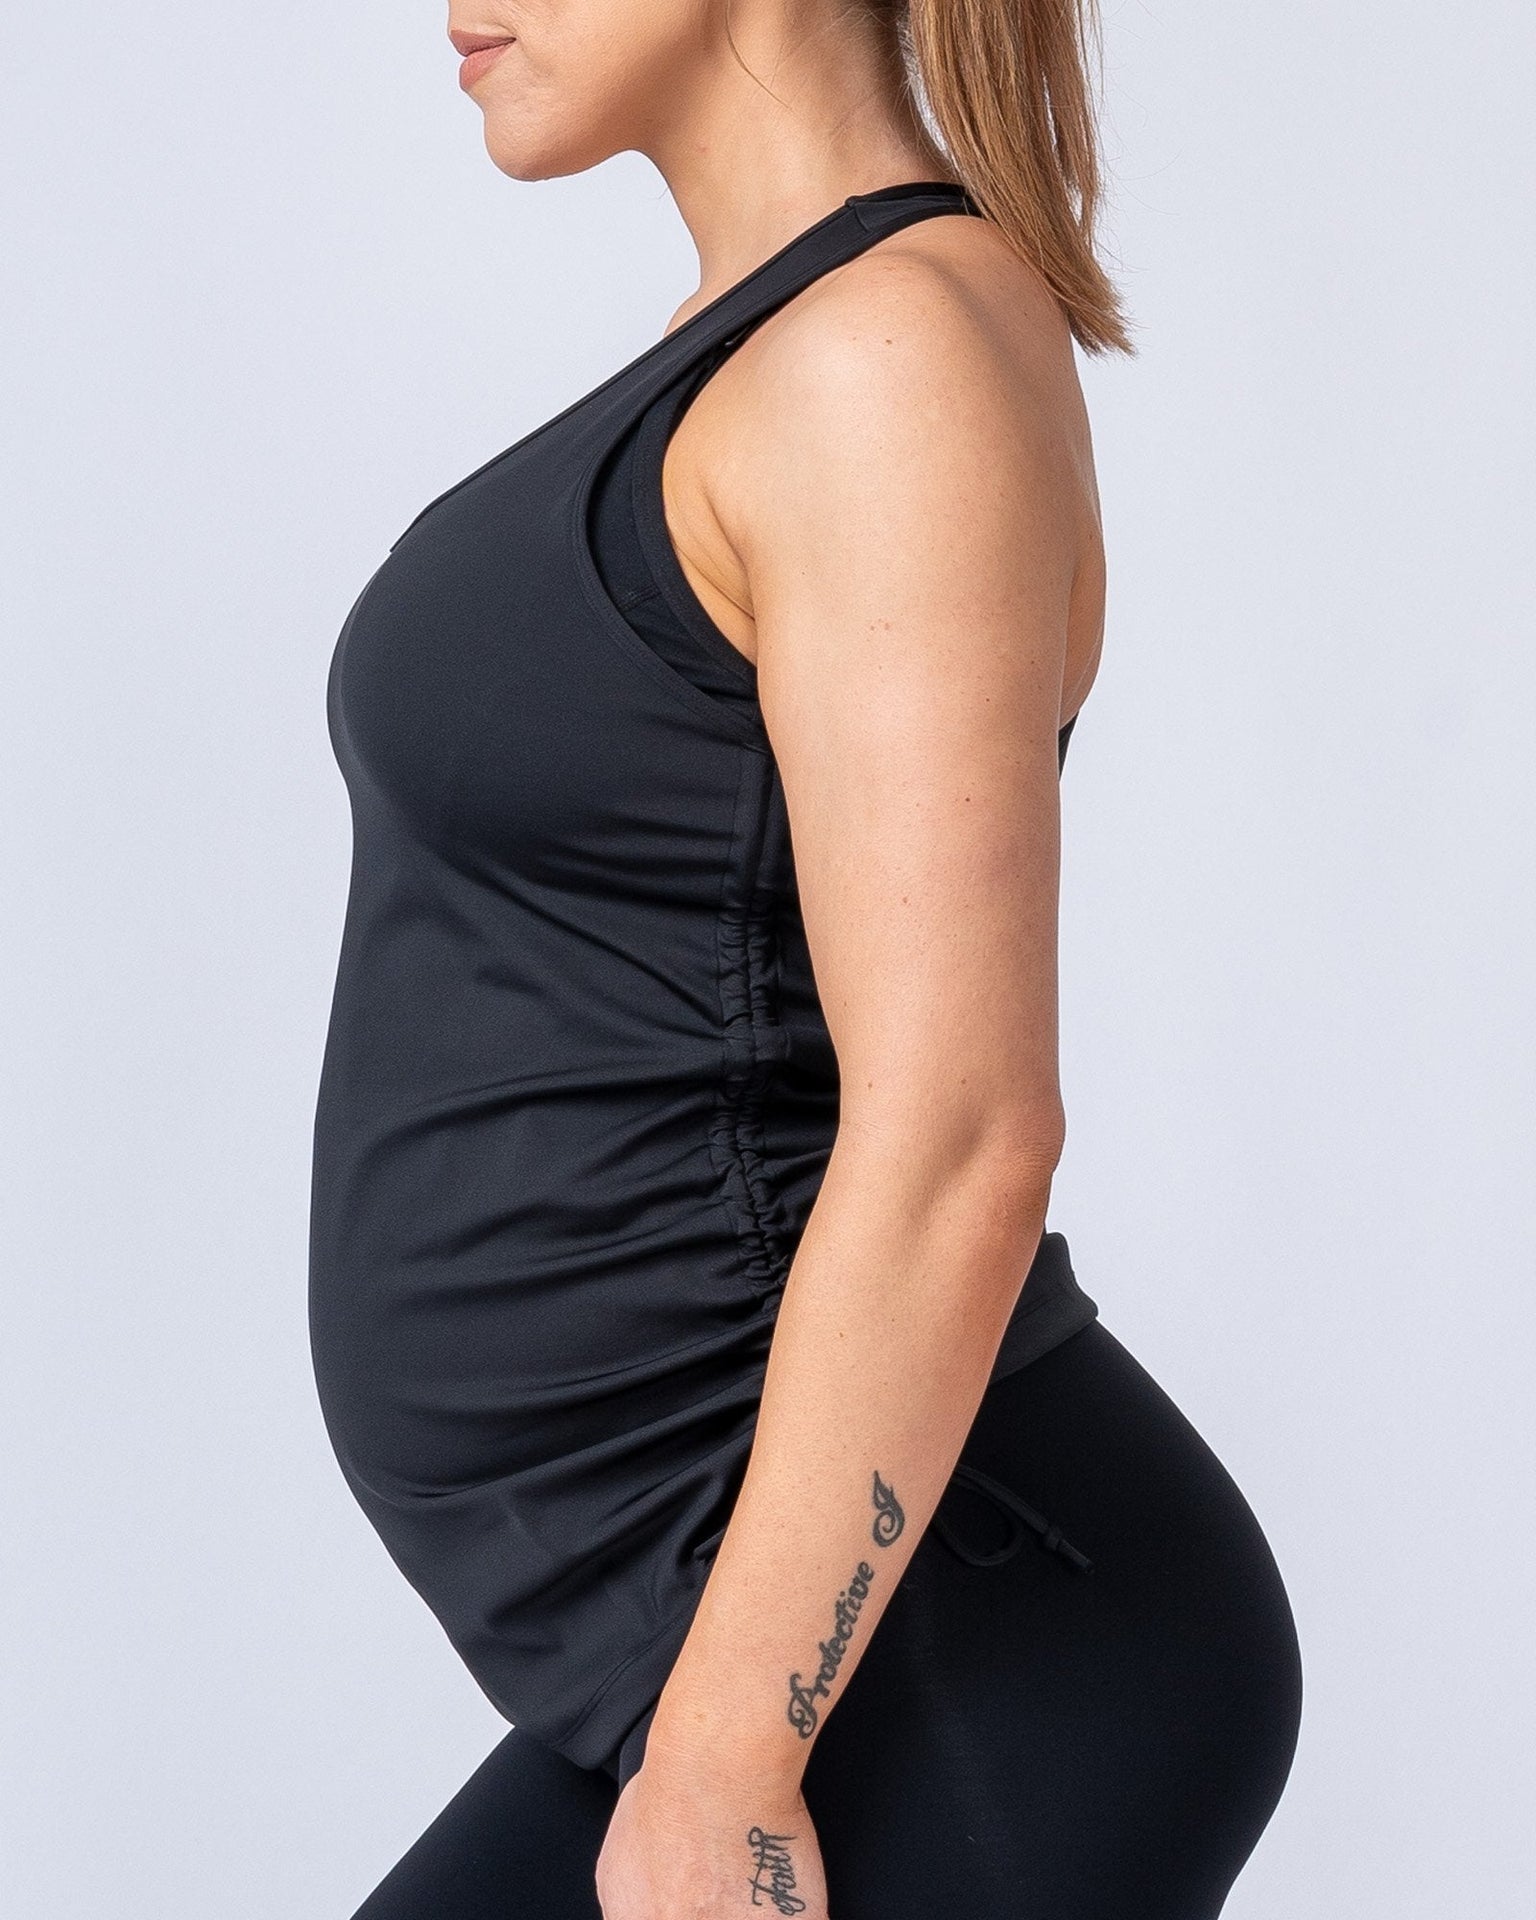 Side Ruched Scoop Neck Maternity Tank Top - Black, Size: Medium